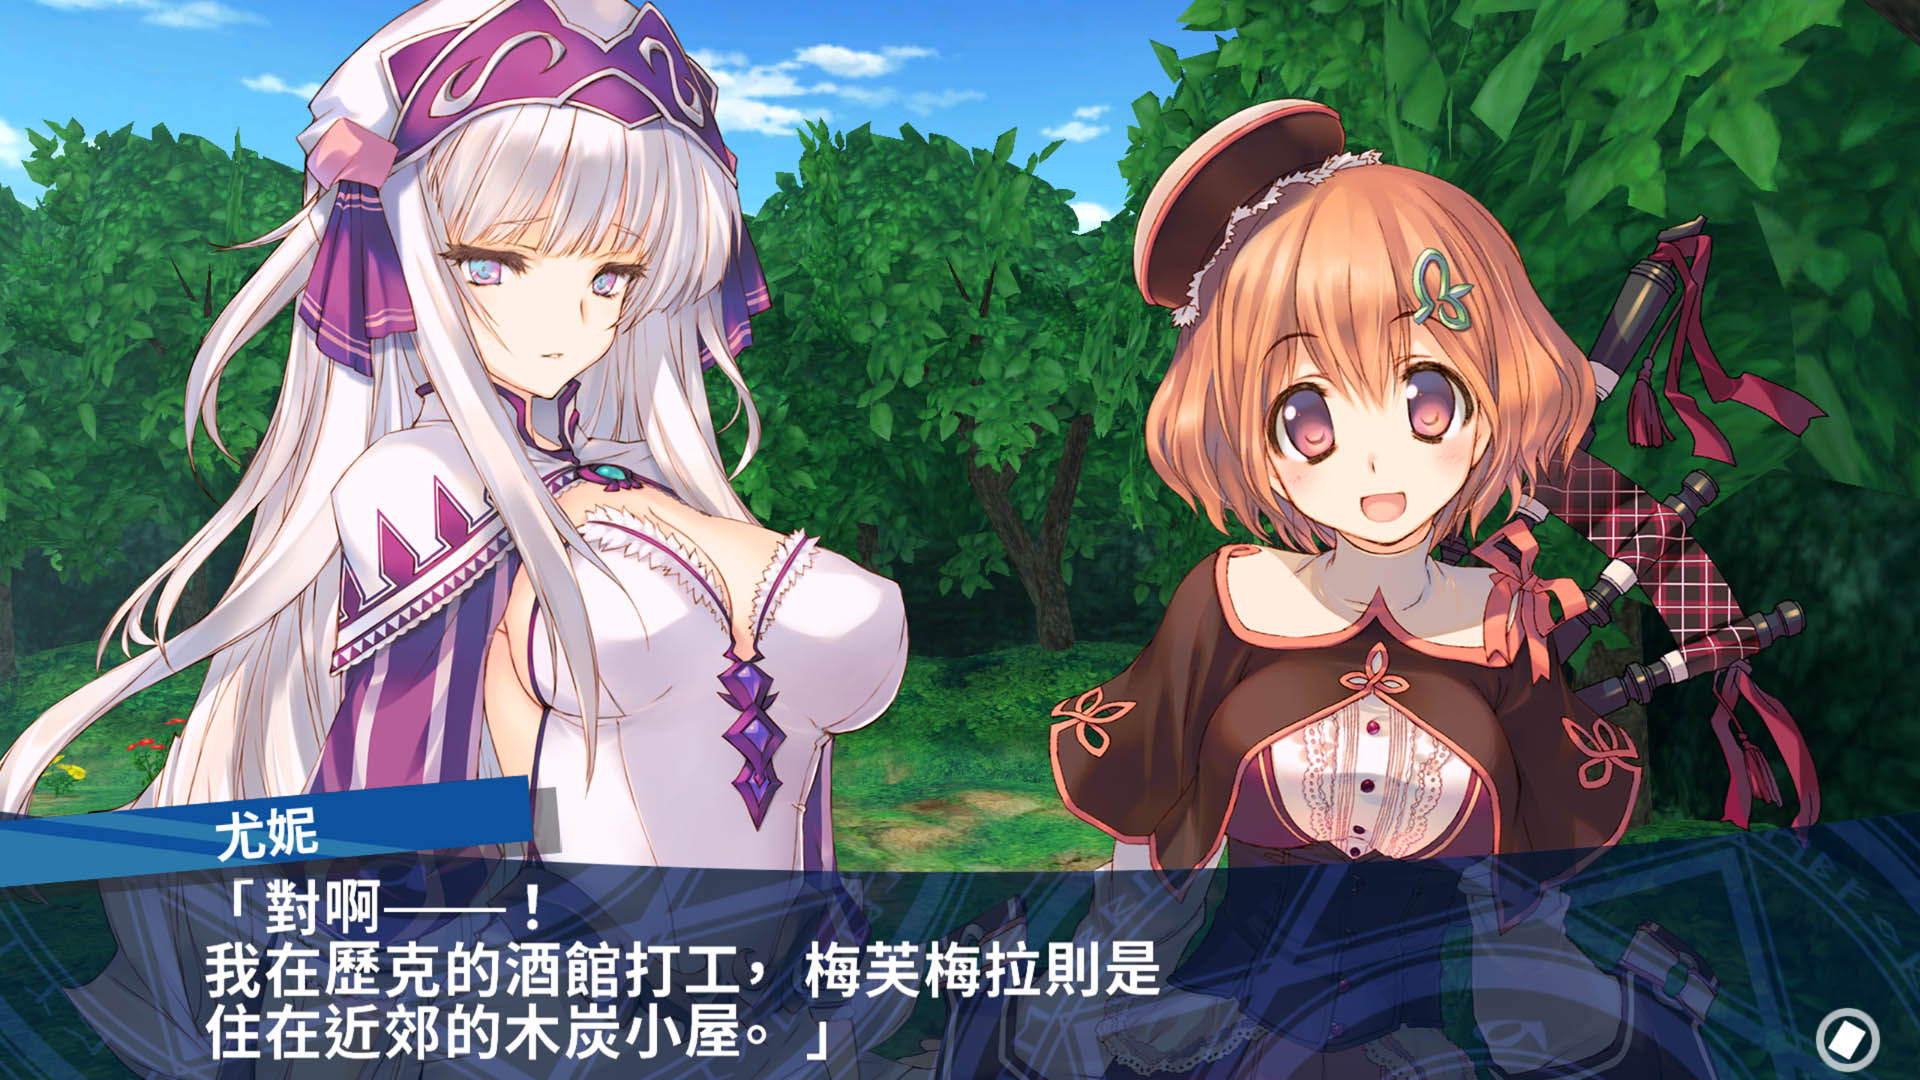 Dungeon Travelers 2: The Royal Library & the Monster Seal (Traditional Chinese) - RPG - 2 - Select